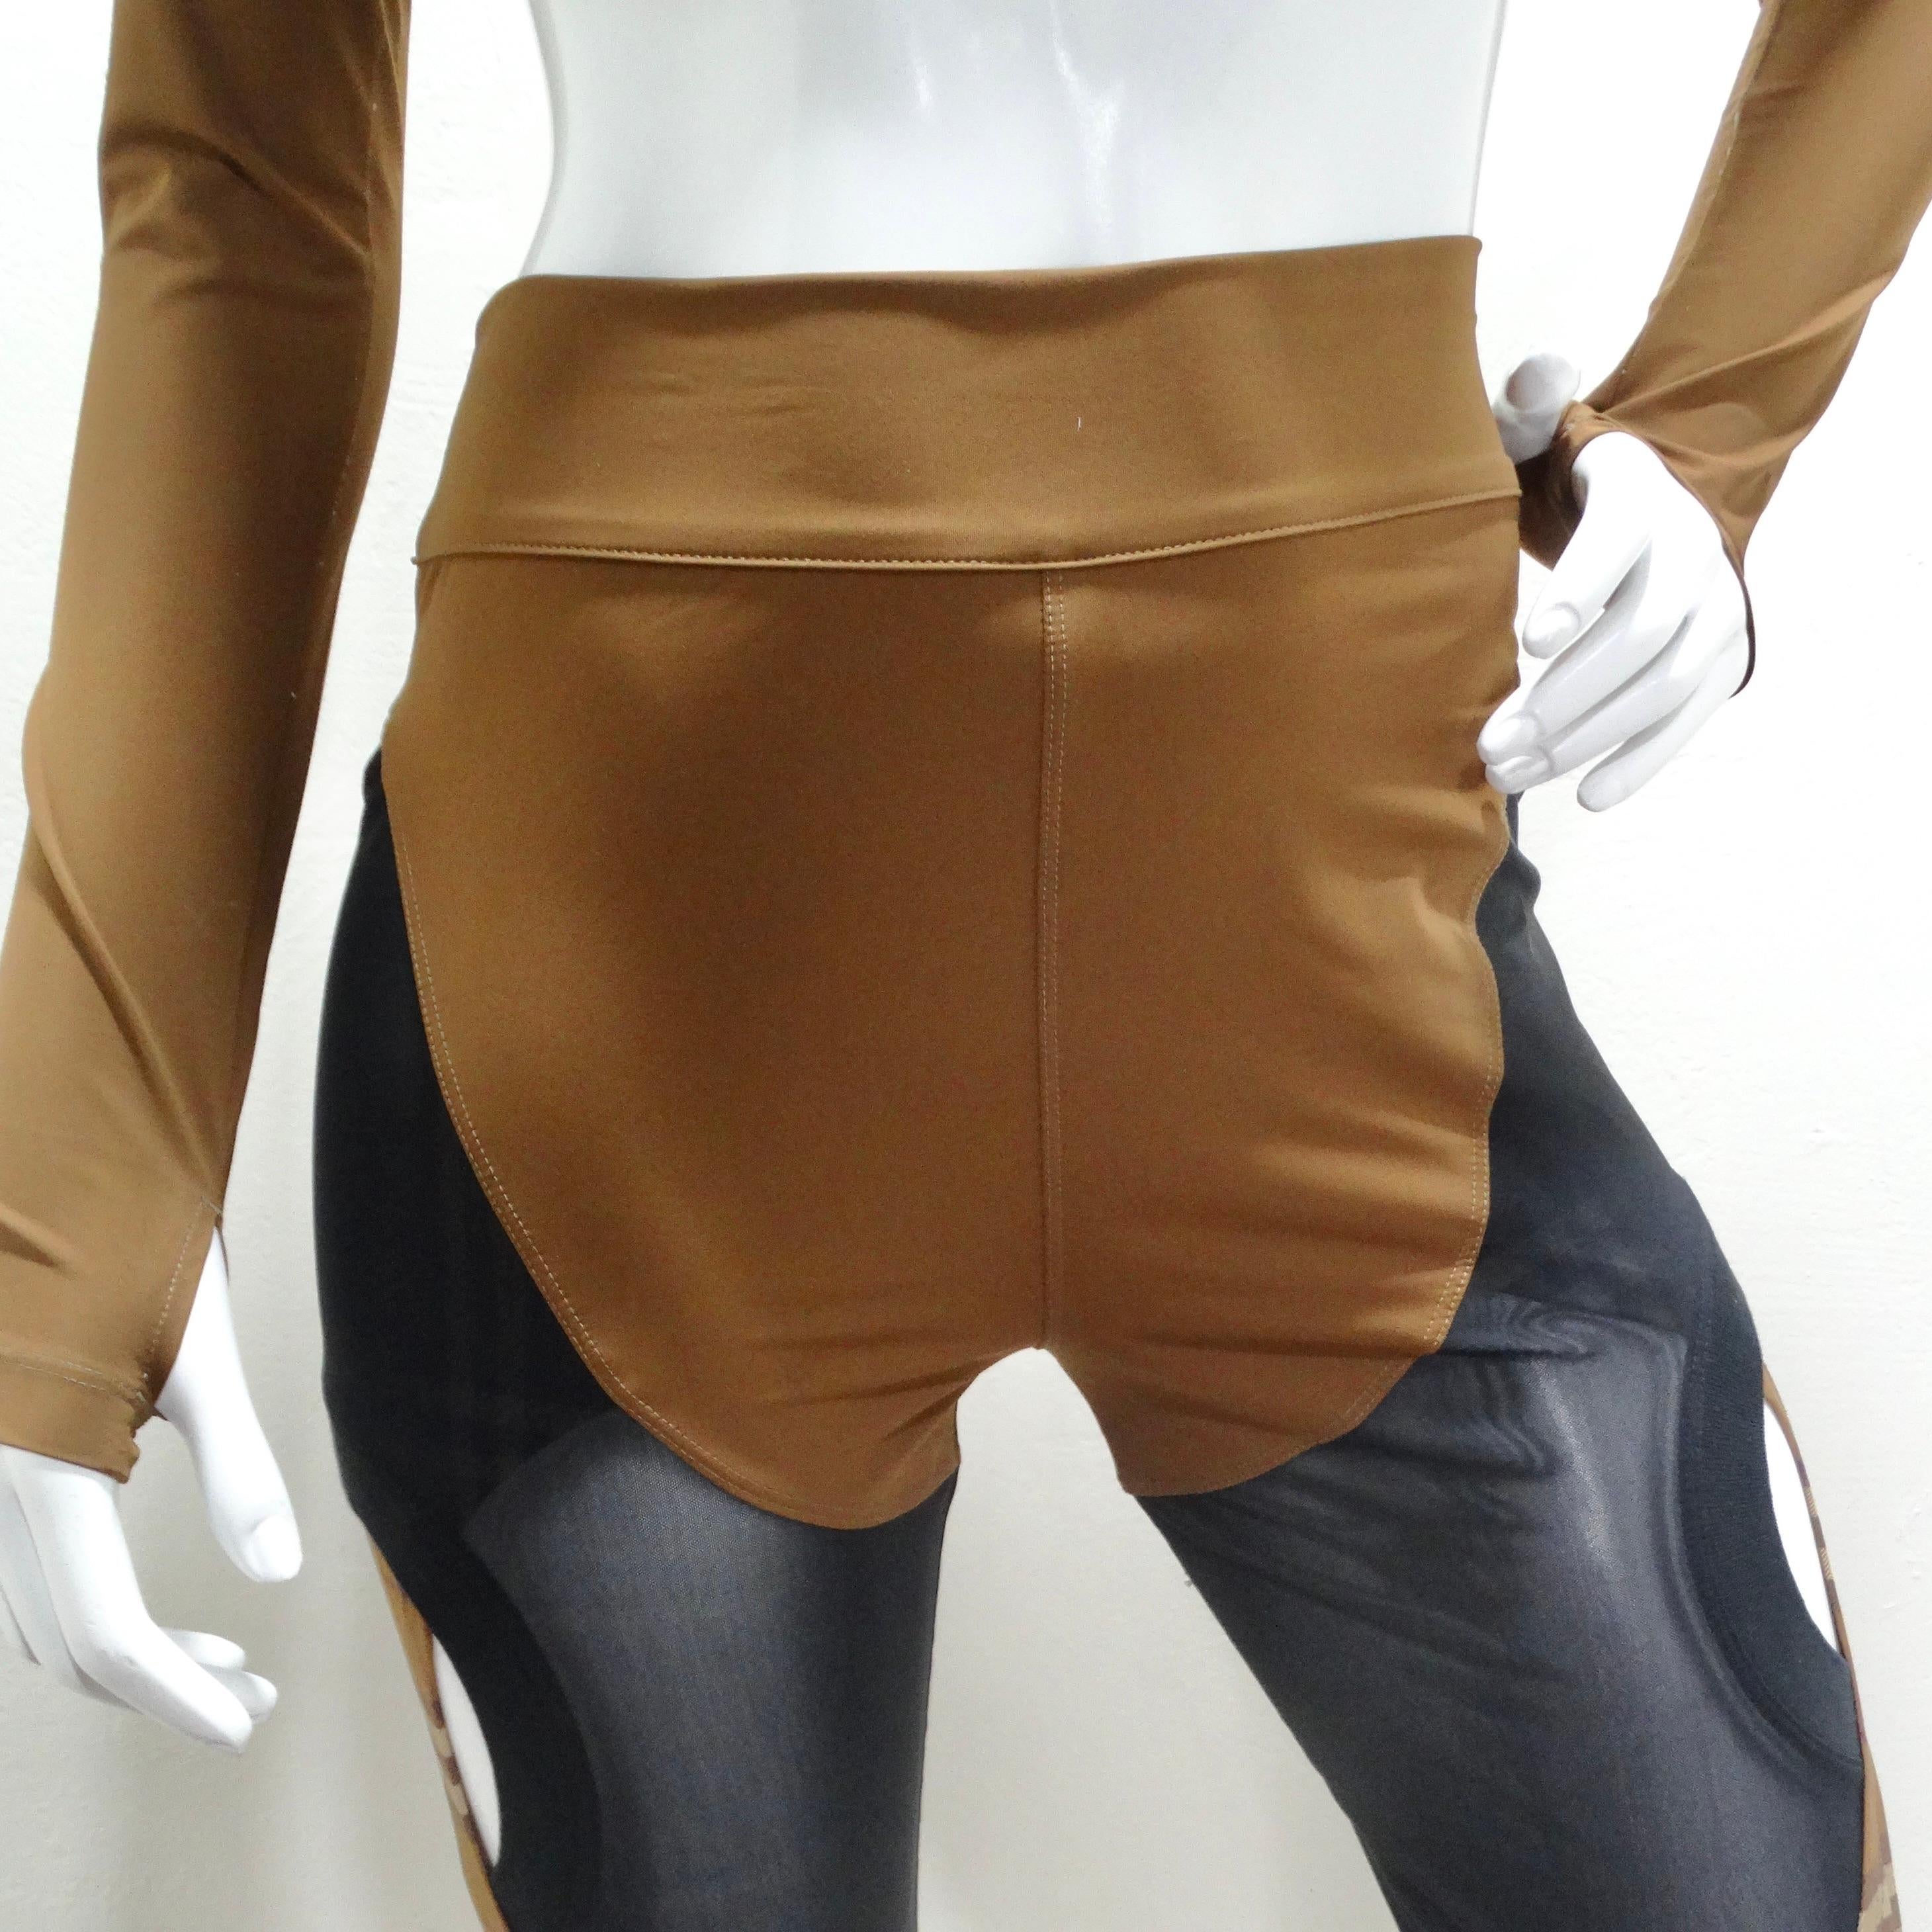 Introducing the Burberry Sporty Panel Brown Leggings – a stunning fusion of style and functionality that will elevate your workout attire to new heights. Crafted in a light brown hue, these leggings feature a unique cut-out design with panels of